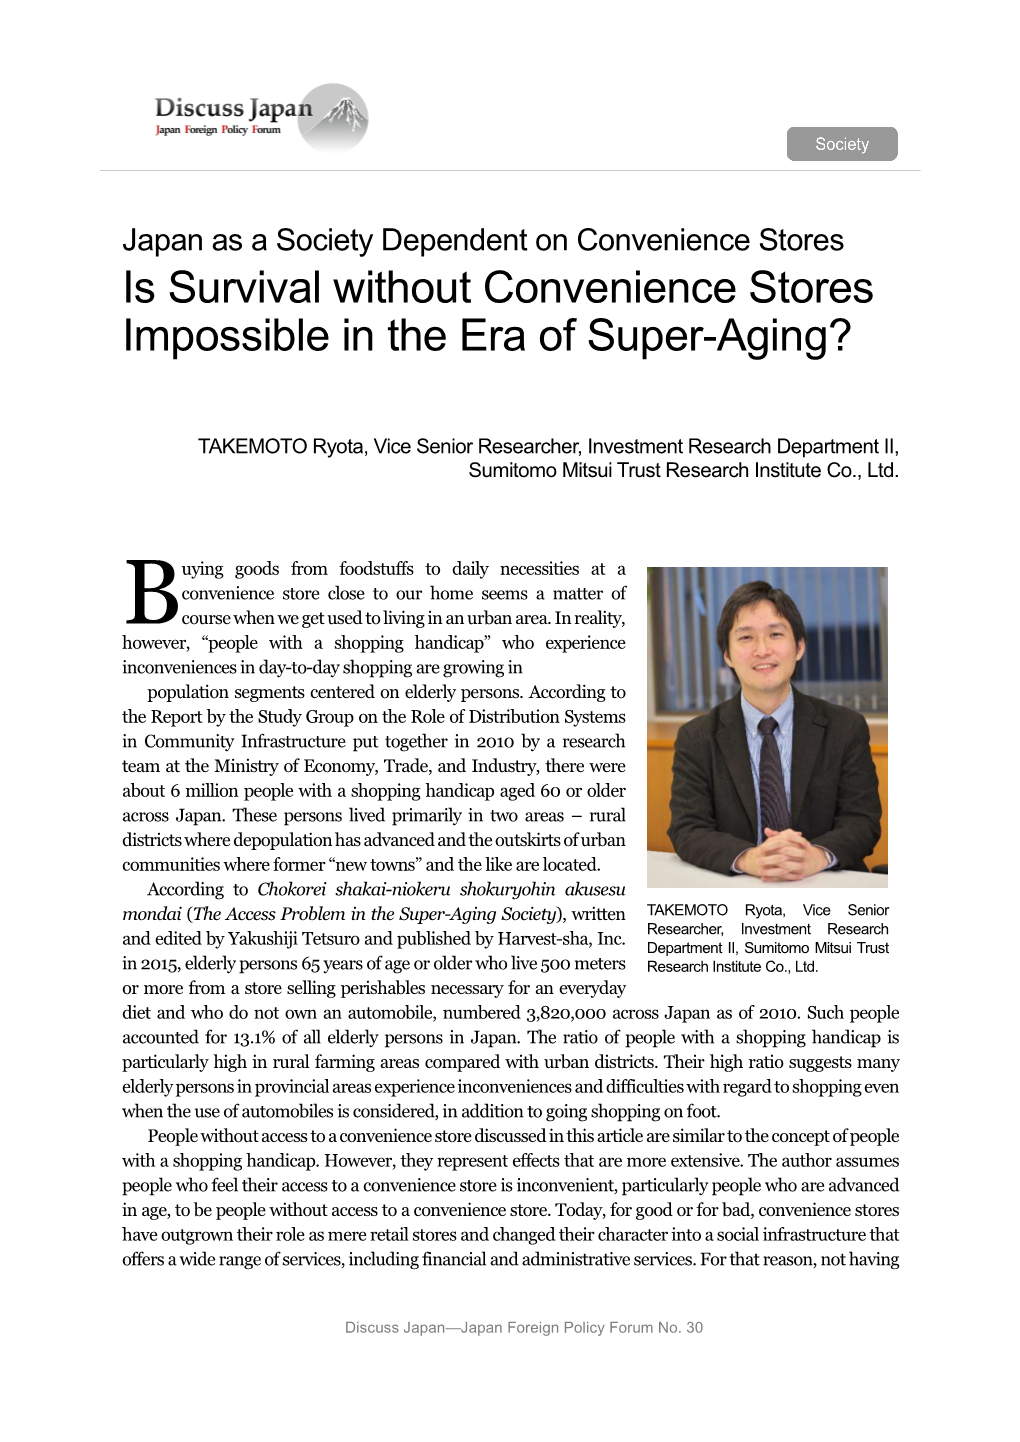 Is Survival Without Convenience Stores Impossible in the Era of Super-Aging?